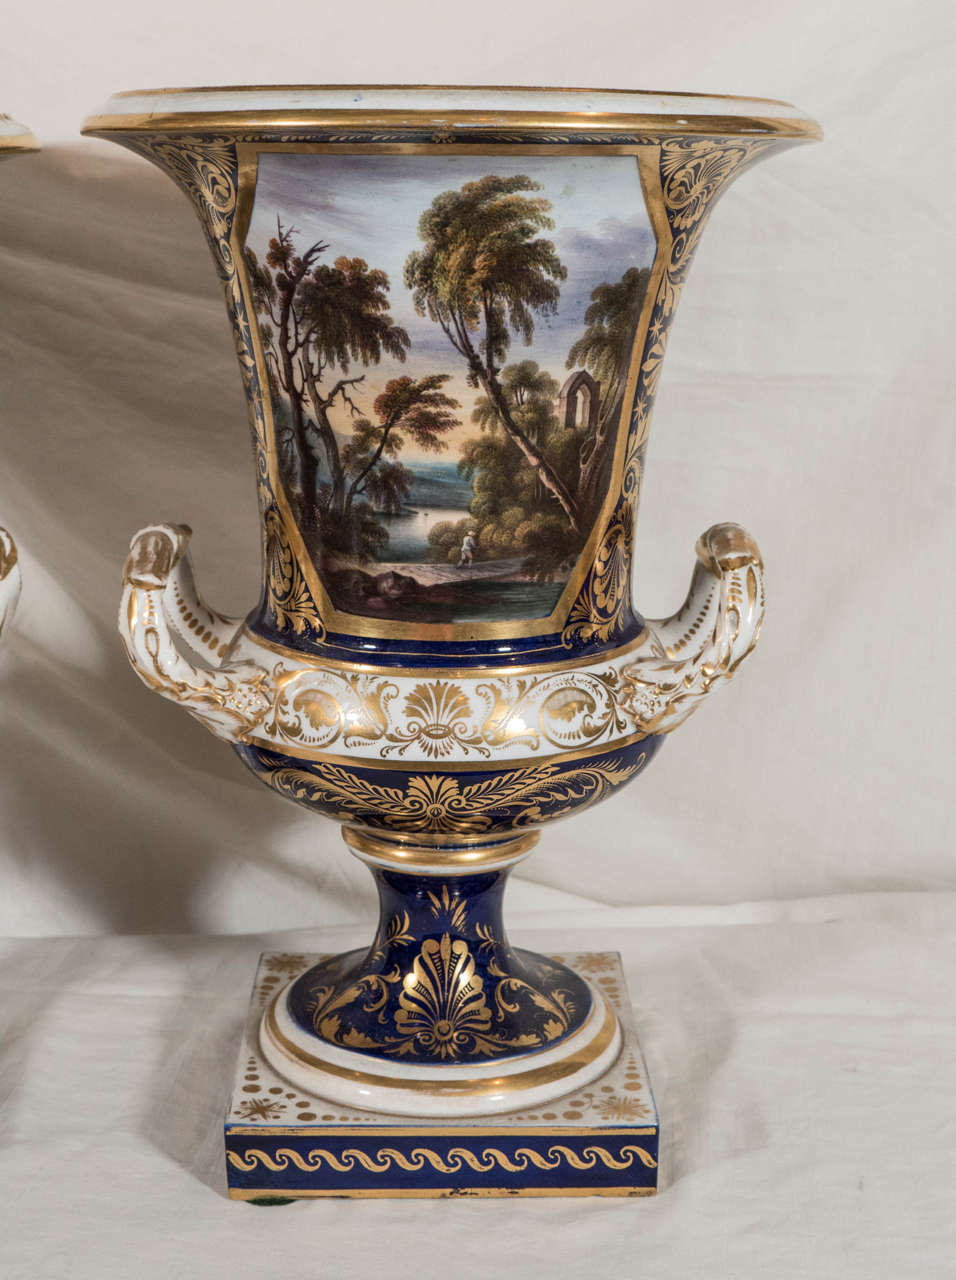 Each urn with square base, scroll handles, a deep blue and gilt ground, and a beautifully painted landscape scene. The scenes 